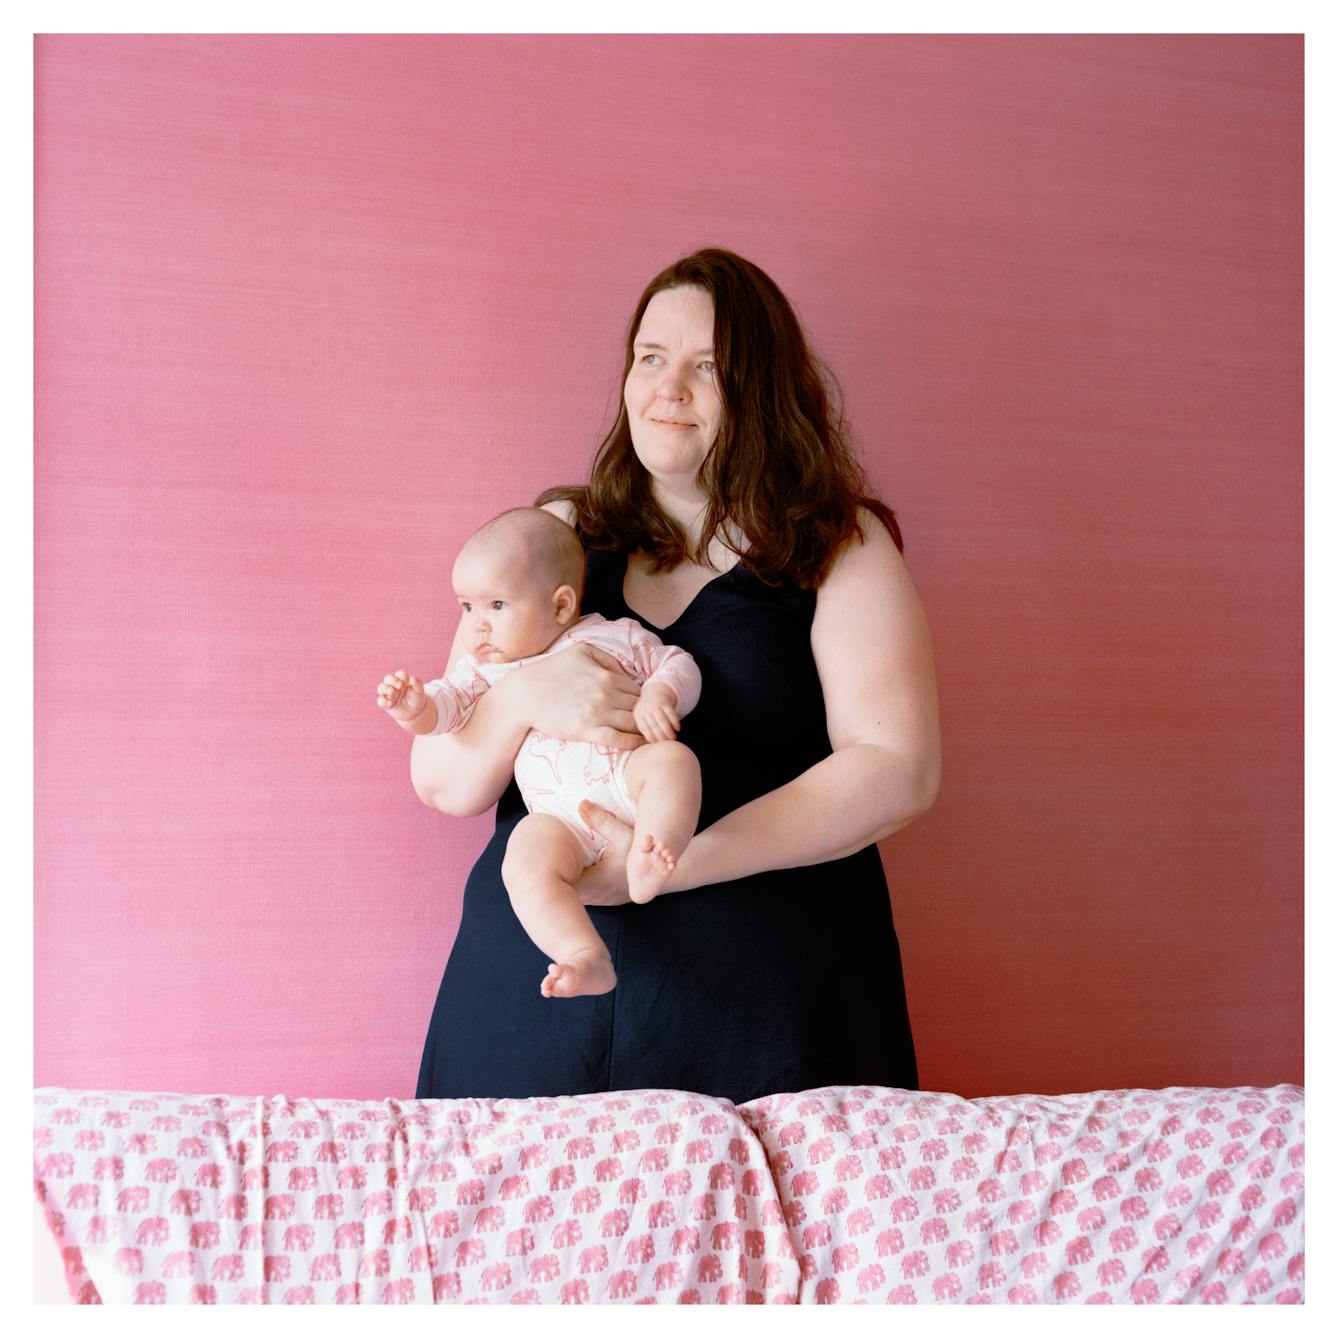 Portrait photograph of Elinor, a woman with shoulder length brown hair, standing in front of a painted pink wall. She is wearing a navy dress and holding a small baby, who is wearing a pink babygro. They are both looking to to the right and Elinor is smiling slightly. There is a patterned white and pink sofa in front of them. 